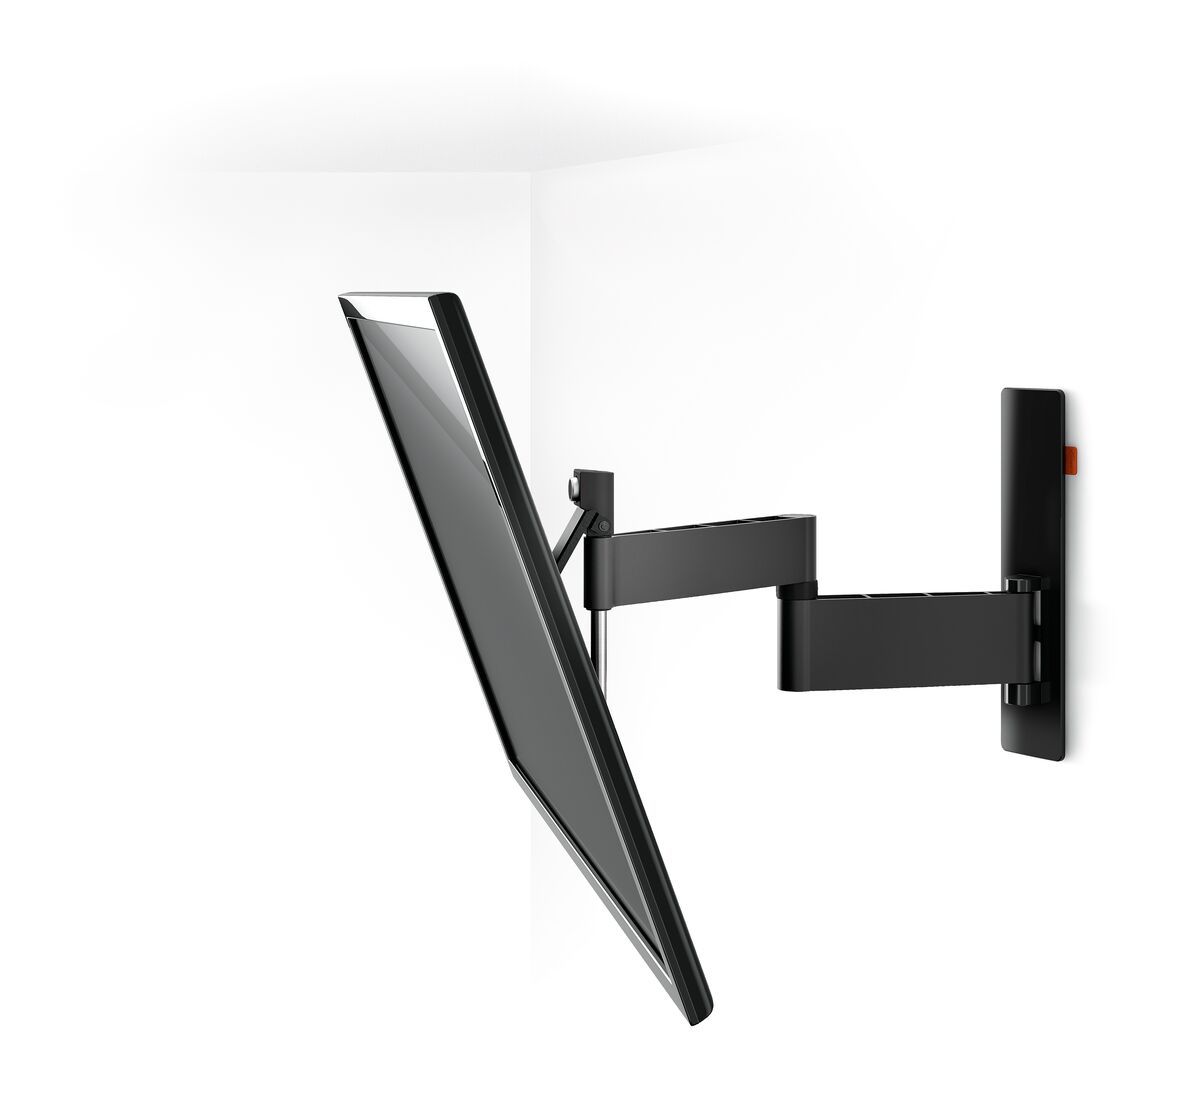 Vogel's WALL 2345 Full-Motion TV Wall Mount (black) - Suitable for 40 up to 65 inch TVs - Full motion (up to 180°) - Tilt up to 20° - White wall